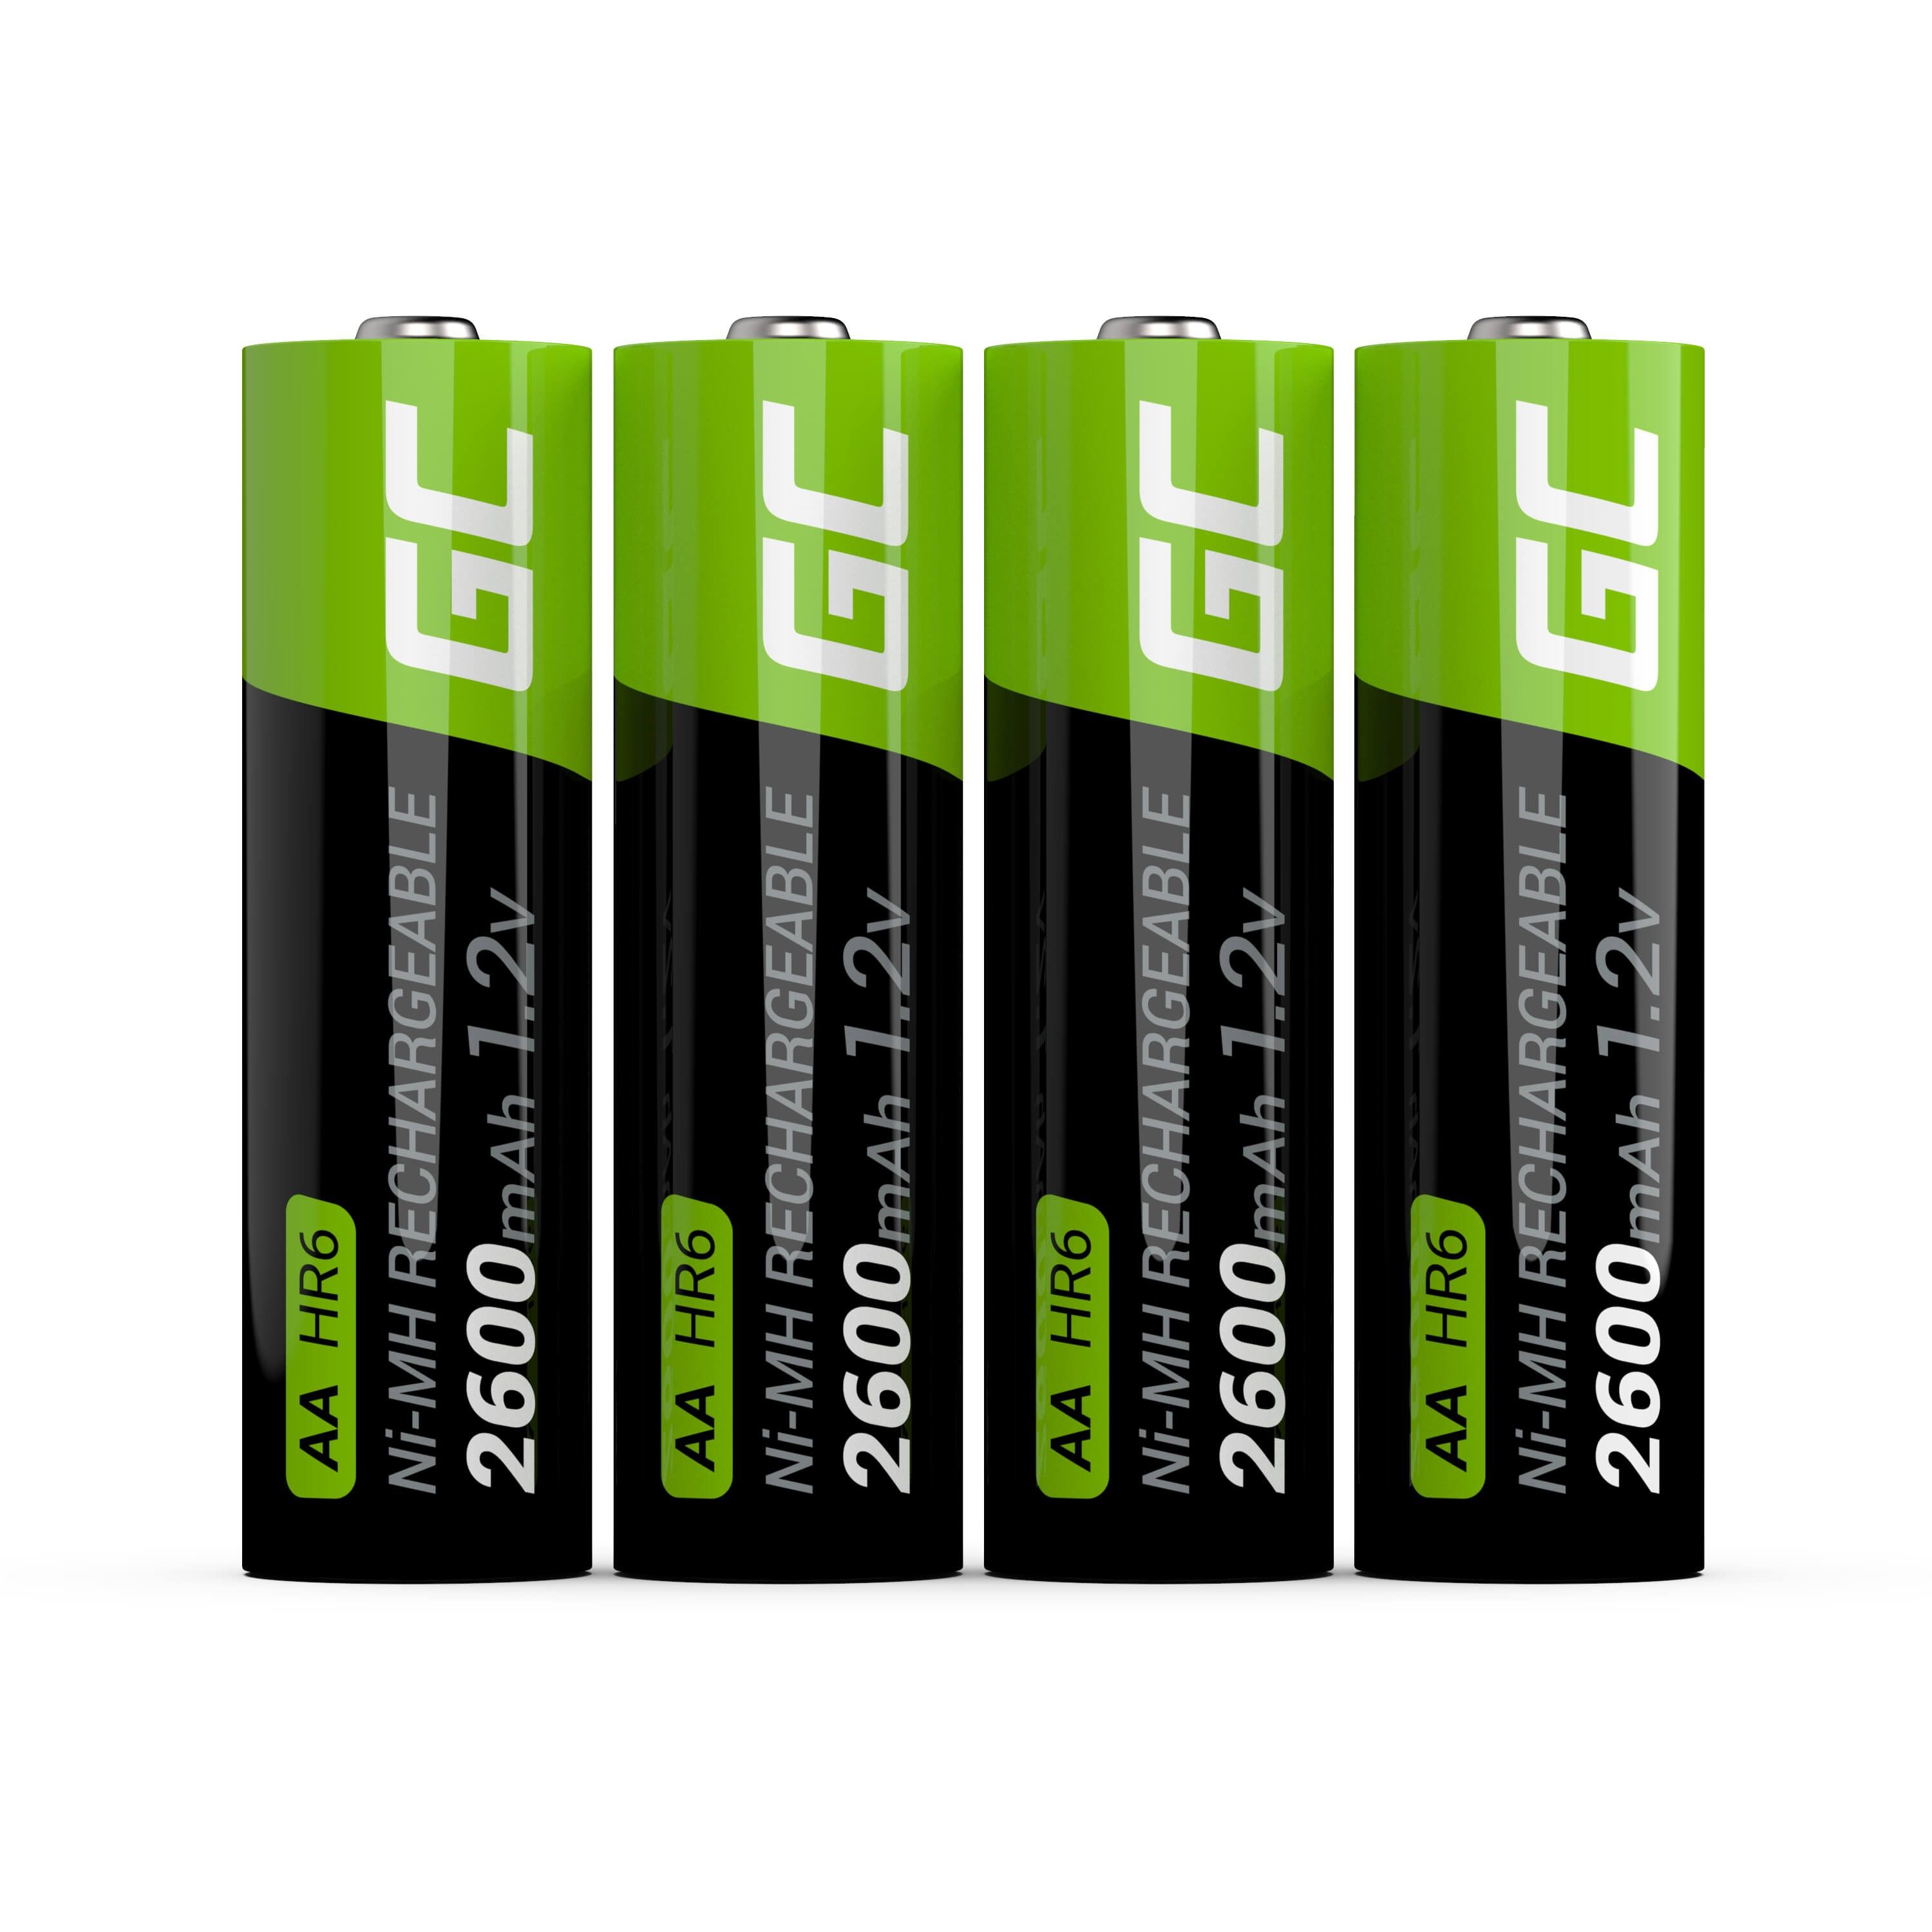 Green Cell GR01 household battery Rechargeable battery AA Nickel-Metal Hydride (NiMH) 4X AA R6 2600MAH_2